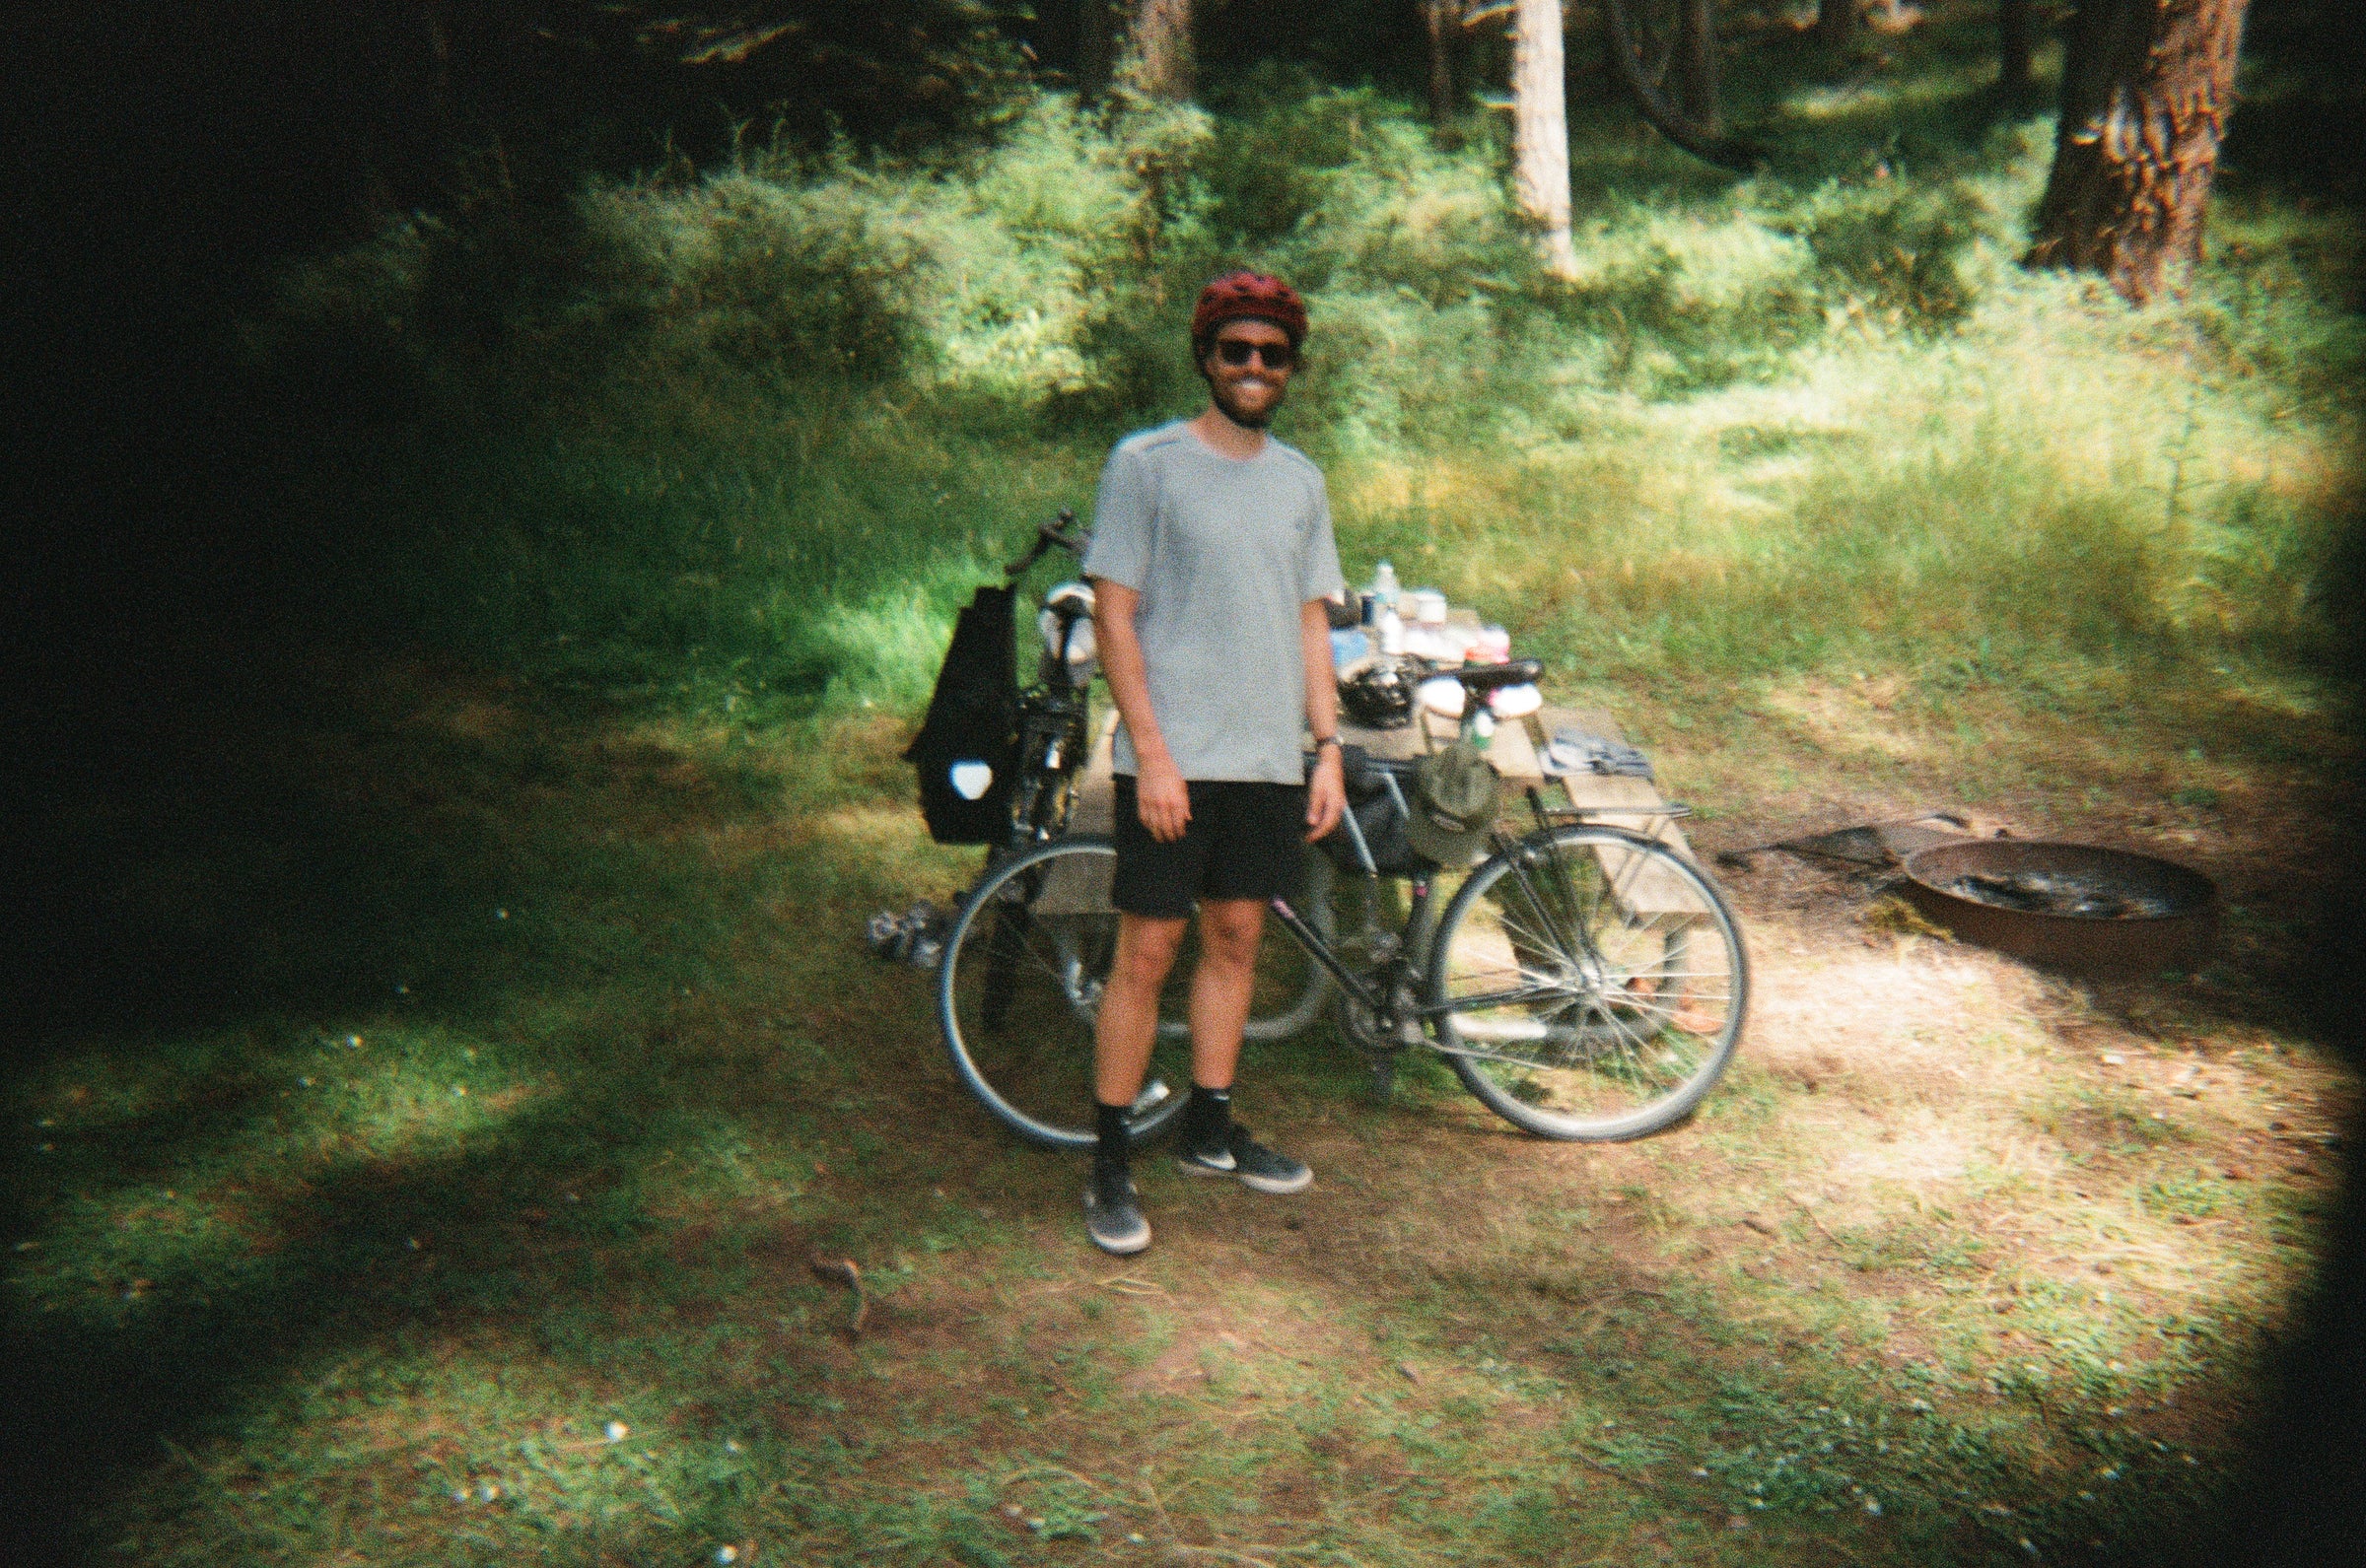 me posing in front of my bike at our campsite in Moran State Park